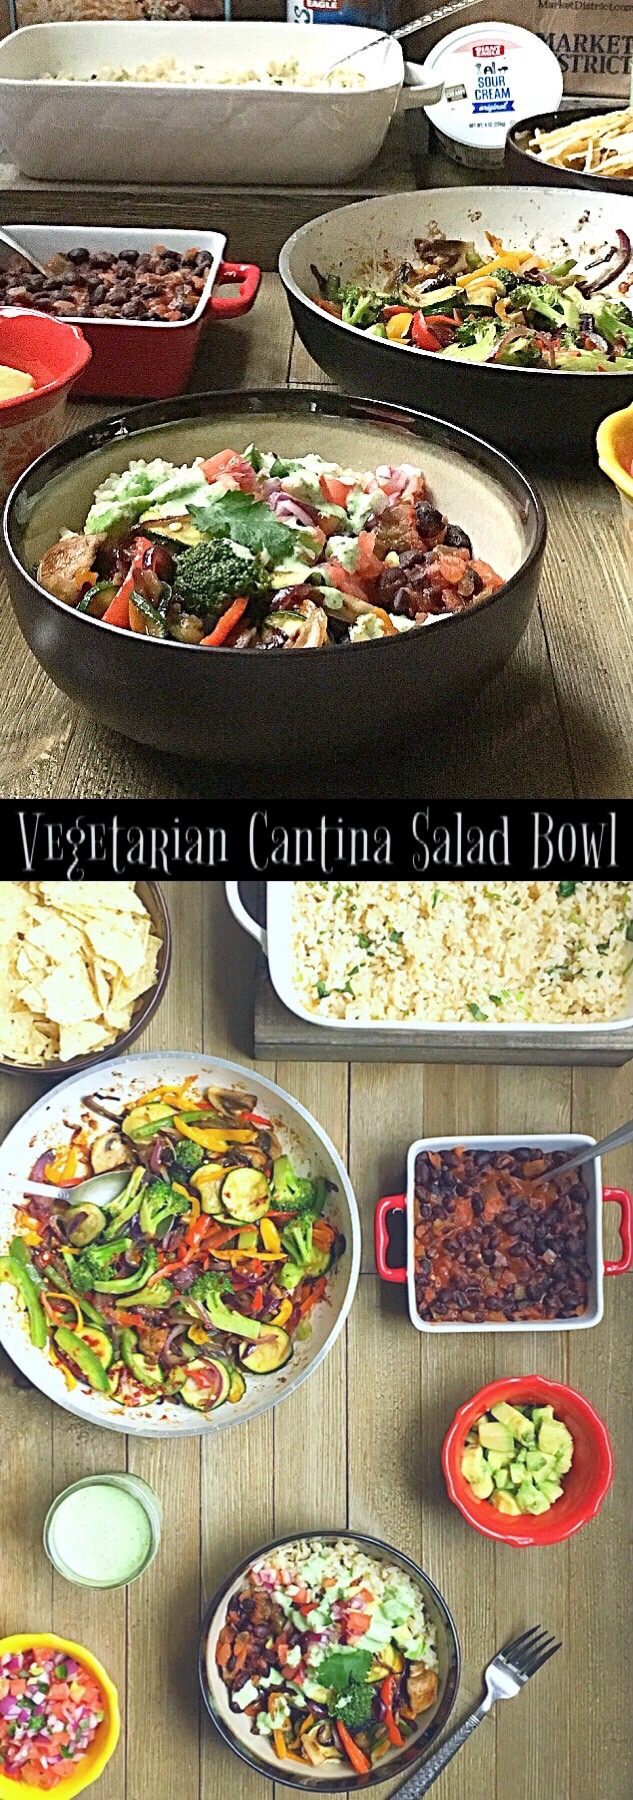 Vegetarian Cantina Salad Bowl with Giant Eagle Curbside Express Delivery #ad #GiantEagleDelivers #vegetariansalad #texmex #cantinasalad #easyrecipes 